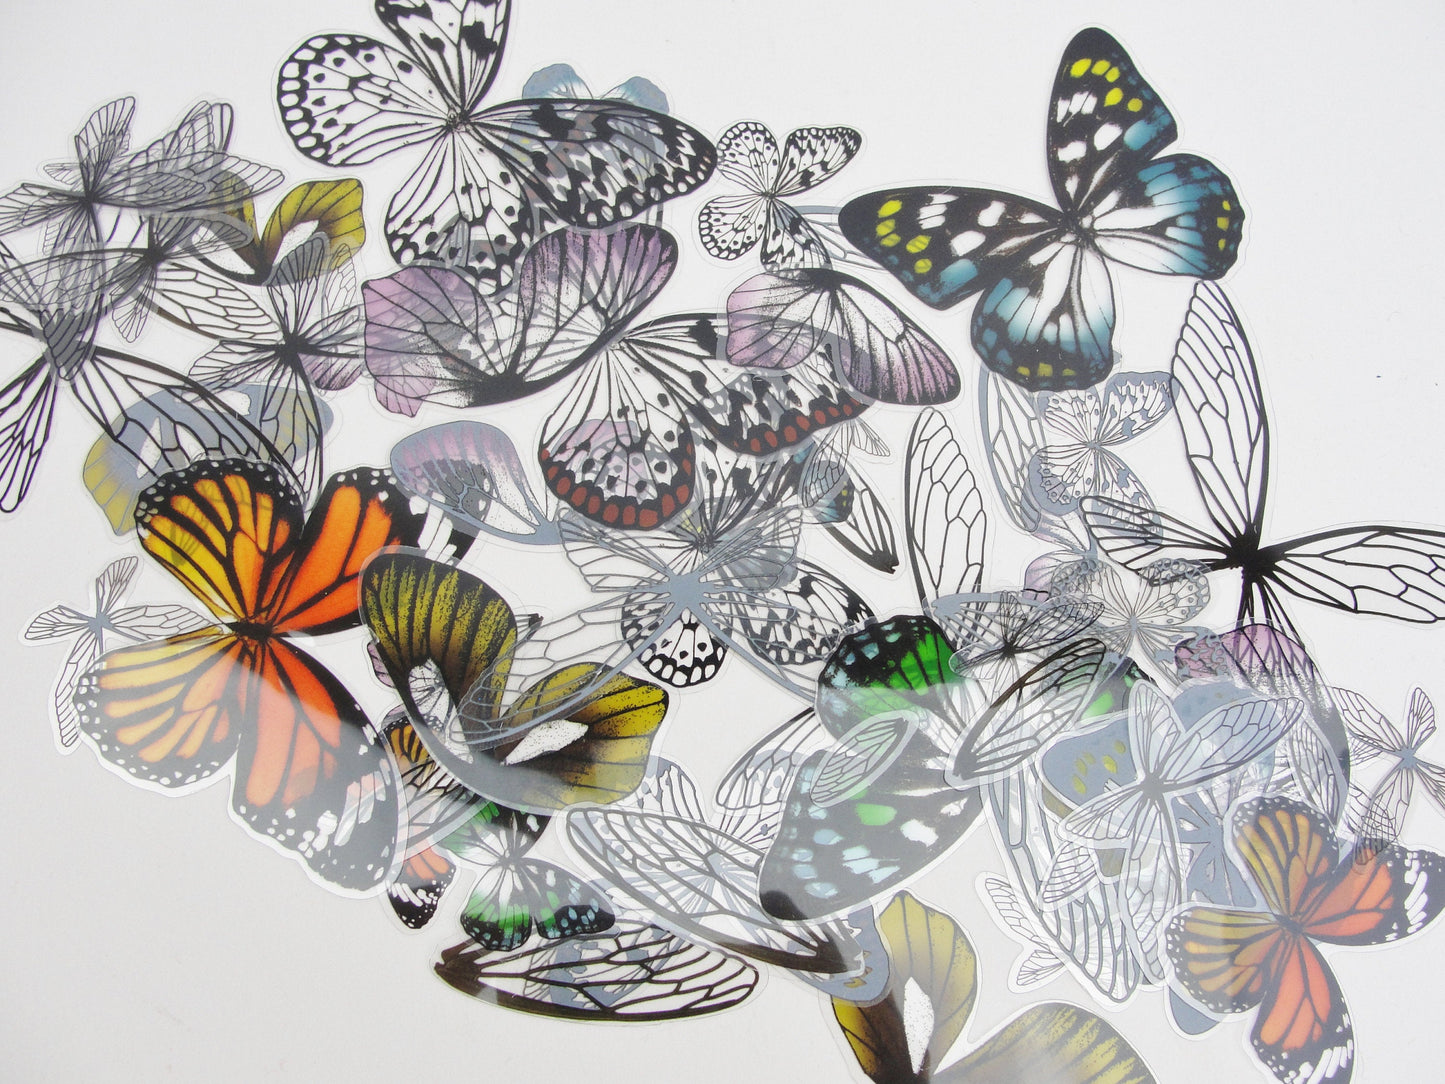 Tim Holtz transparent wings Idea-ology TH93785 - Mixed Media Art Supplies - Craft Supply House